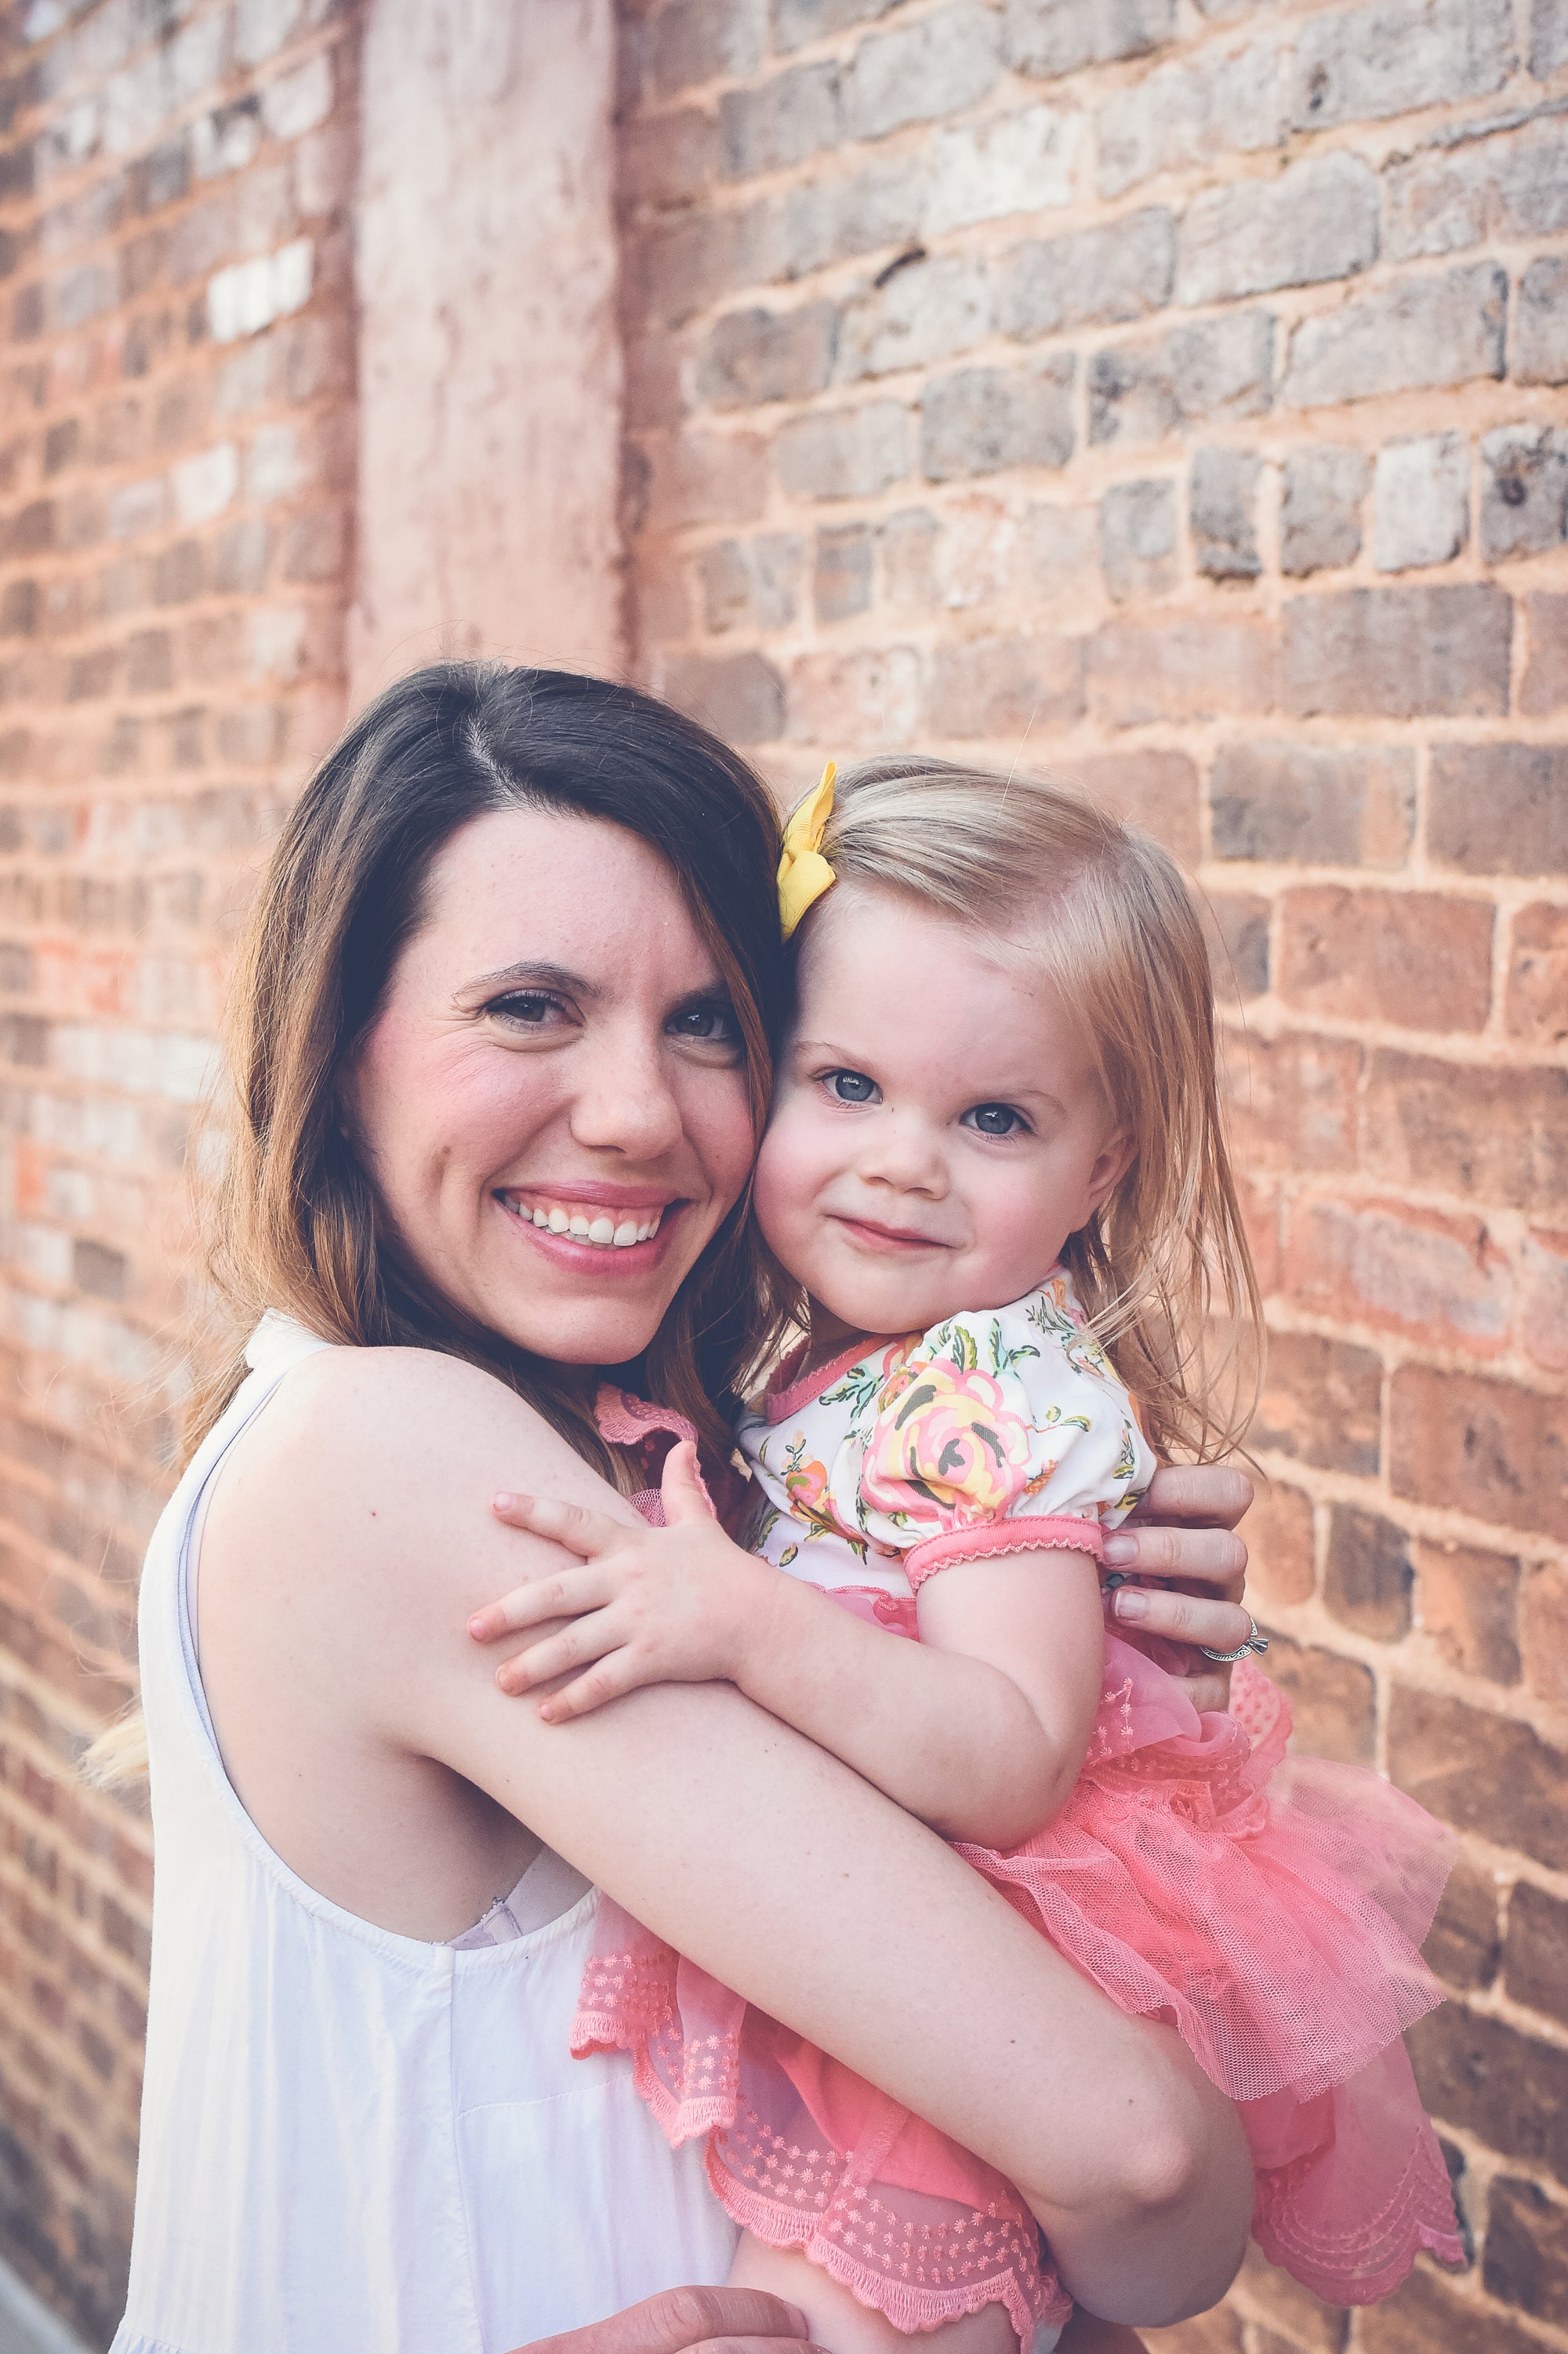 #OhhMoments - Lindsay shares her daughter Food Allergy story and how it changed her mom life